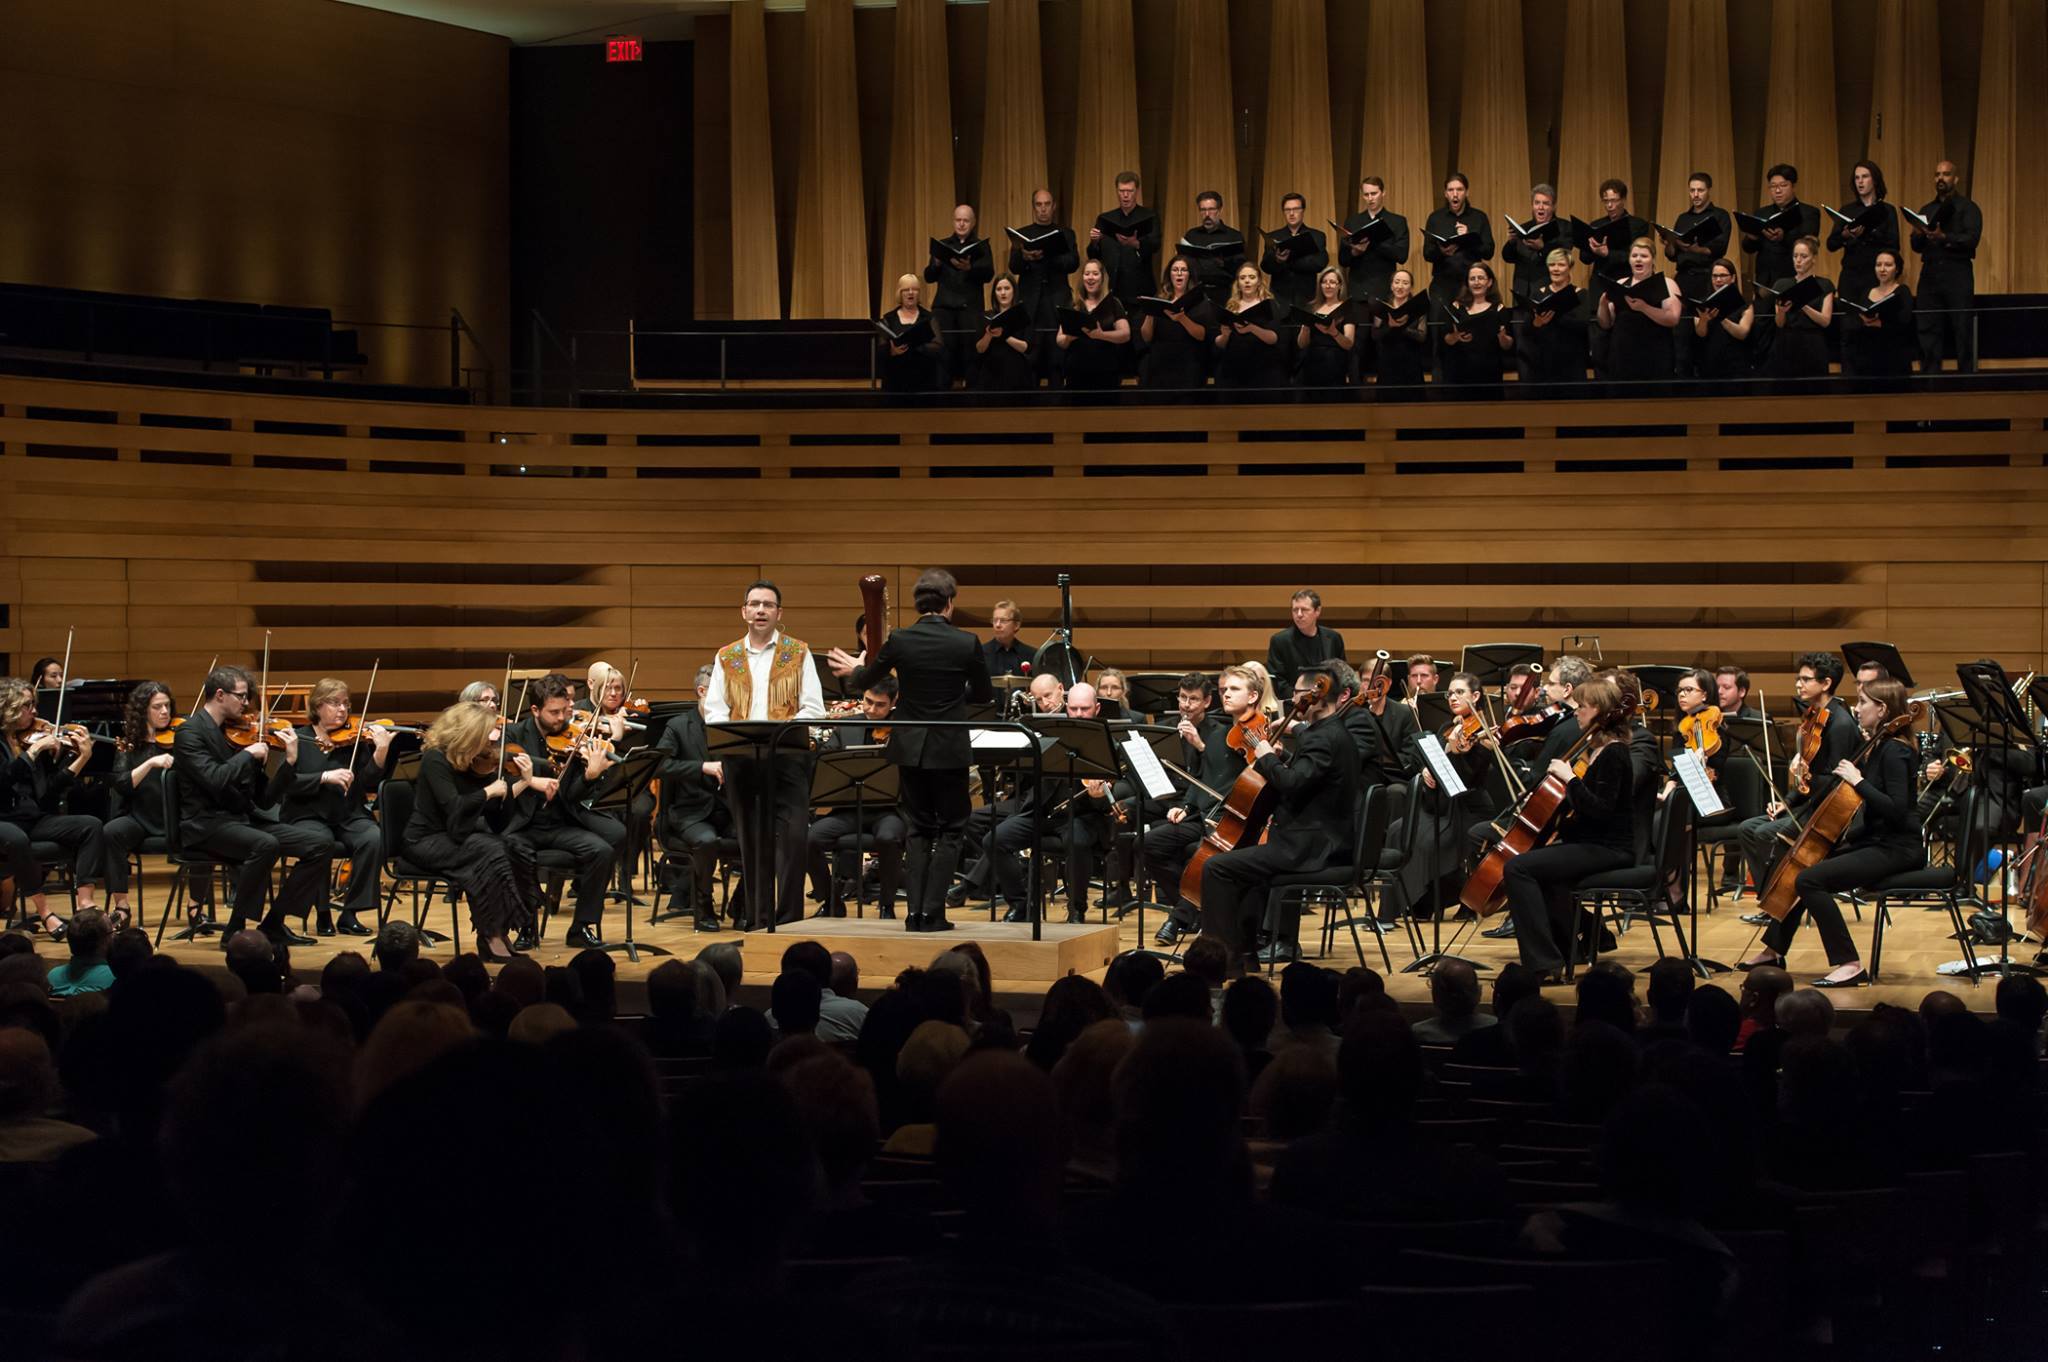  Author and Narrator Richard Van Camp in performance of Naka (Northern Lights) with the Canadian Opera Company Orchestra and Elmer Eisler Singers conducted by Johannes Debus at the 21C Music Festival 